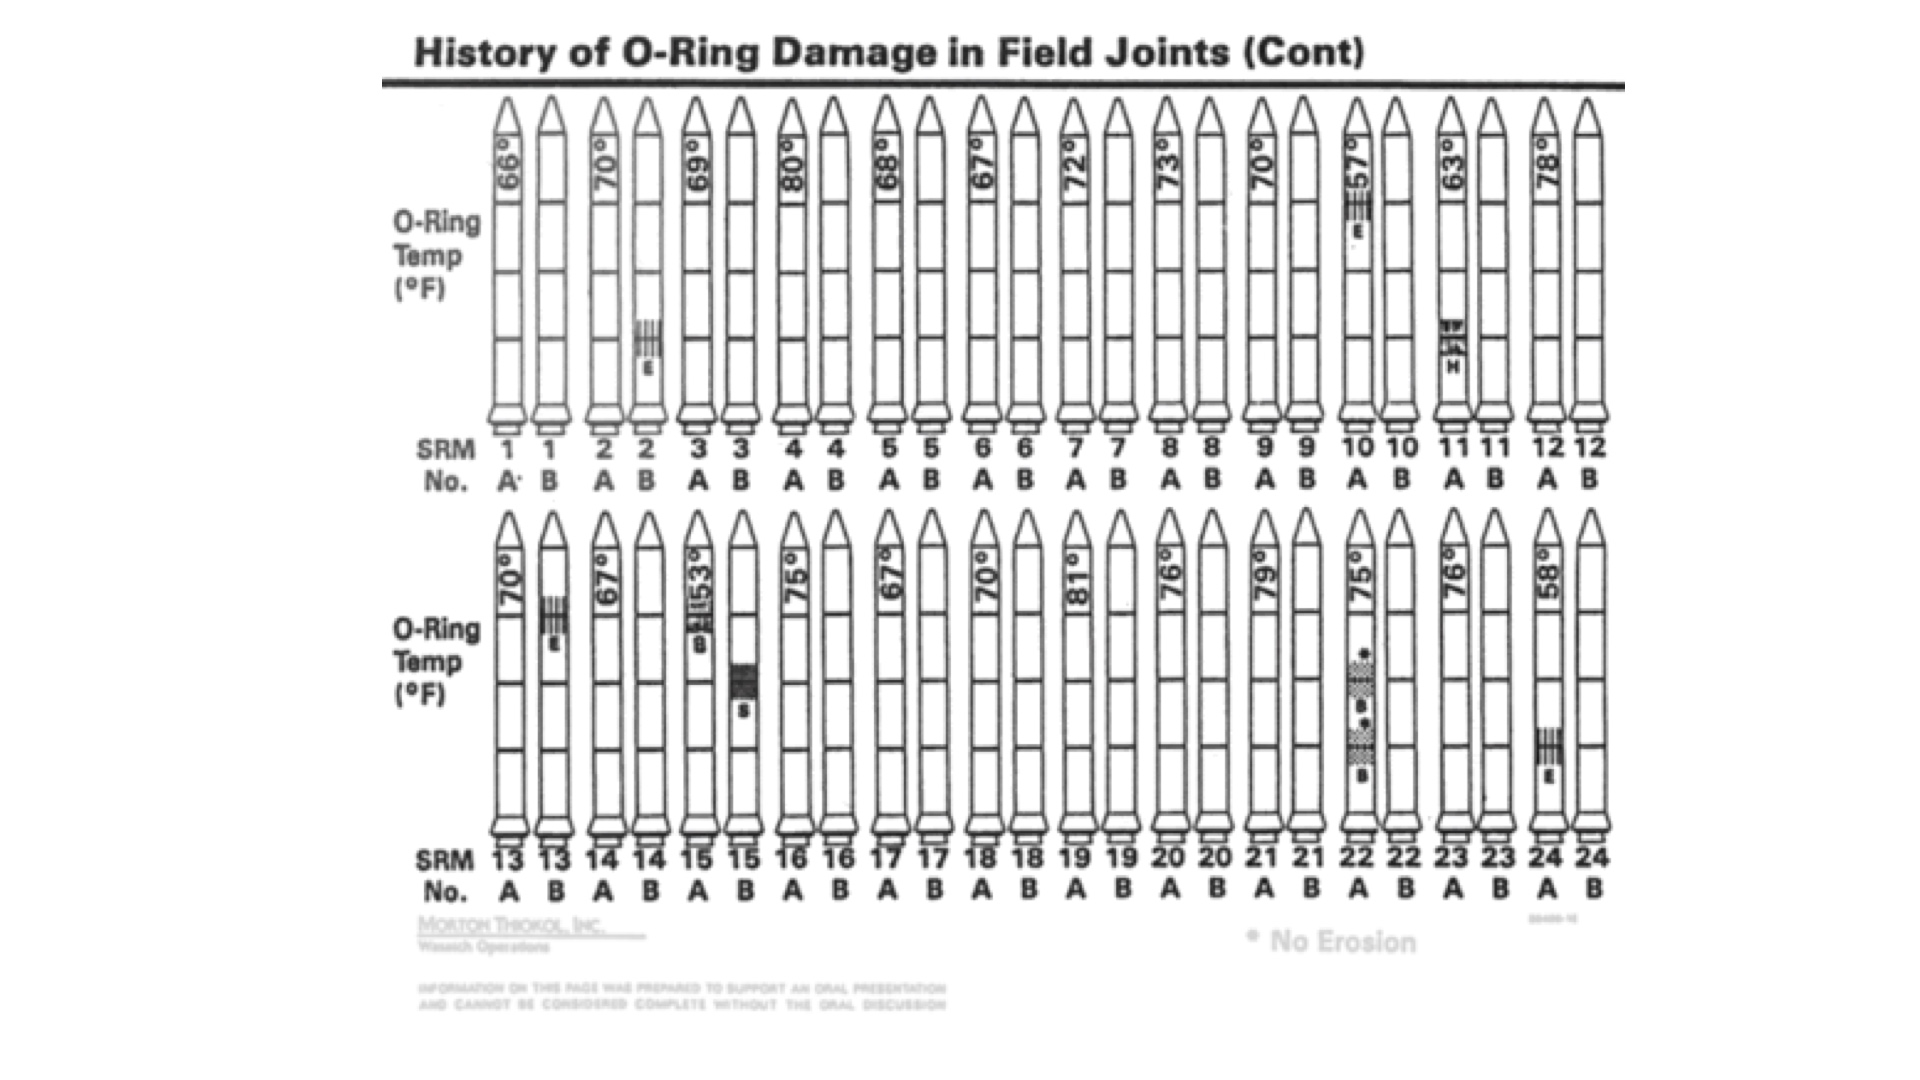 Graph showing damage in previous shuttle launches